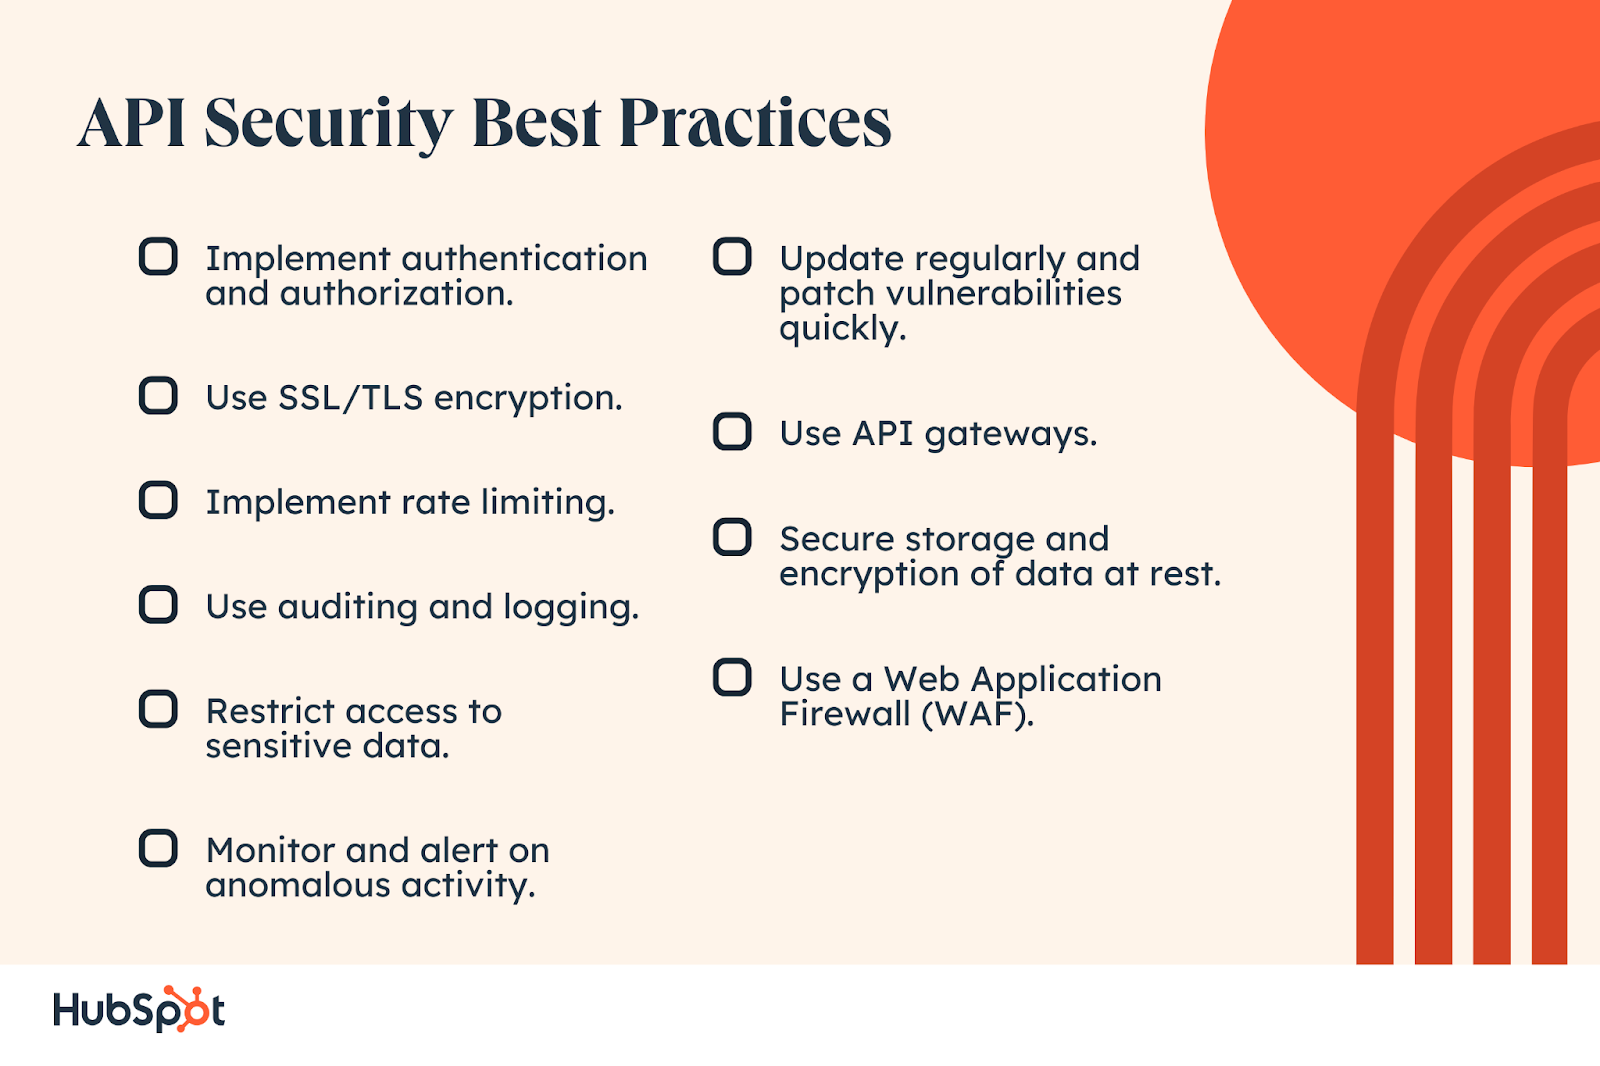 API Security Best Practices. Implement authentication and authorization. Use SSL/TLS encryption. Implement rate limiting. Use auditing and logging. Restrict access to sensitive data. Monitor and alert on anomalous activity. Update regularly and patch vulnerabilities quickly. Use API gateways. Secure storage and encryption of data at rest. Use a Web Application Firewall (WAF).